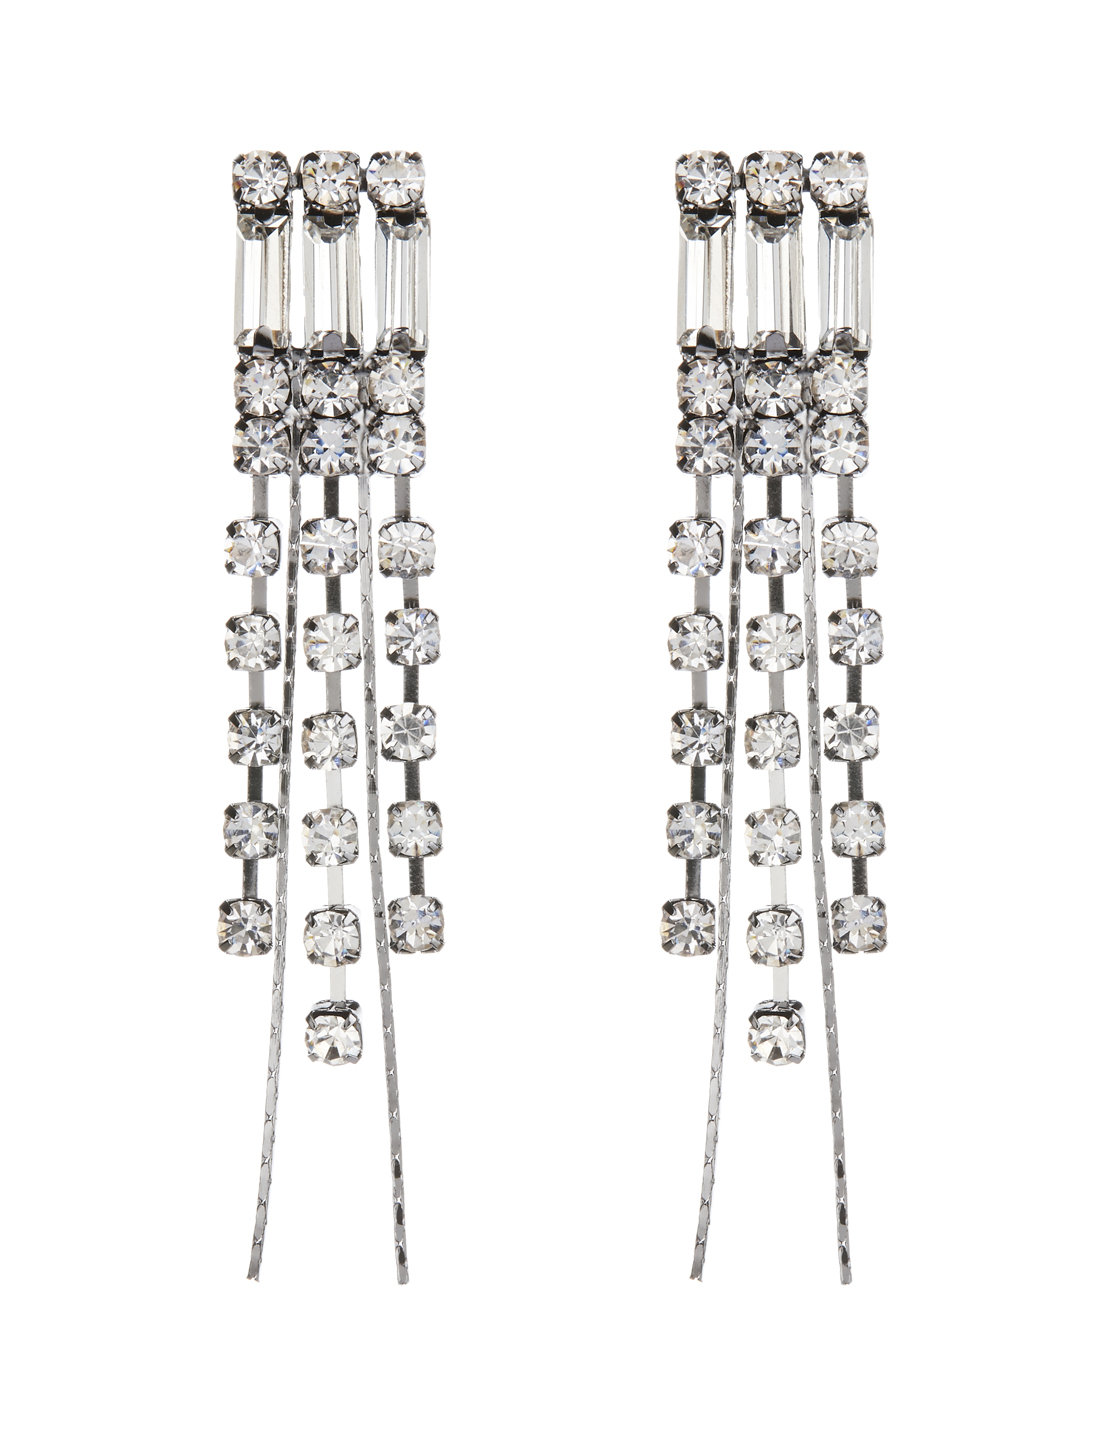 Clip On Earrings - Bobbi - gunmetal grey earring with clear stones and crystal strands